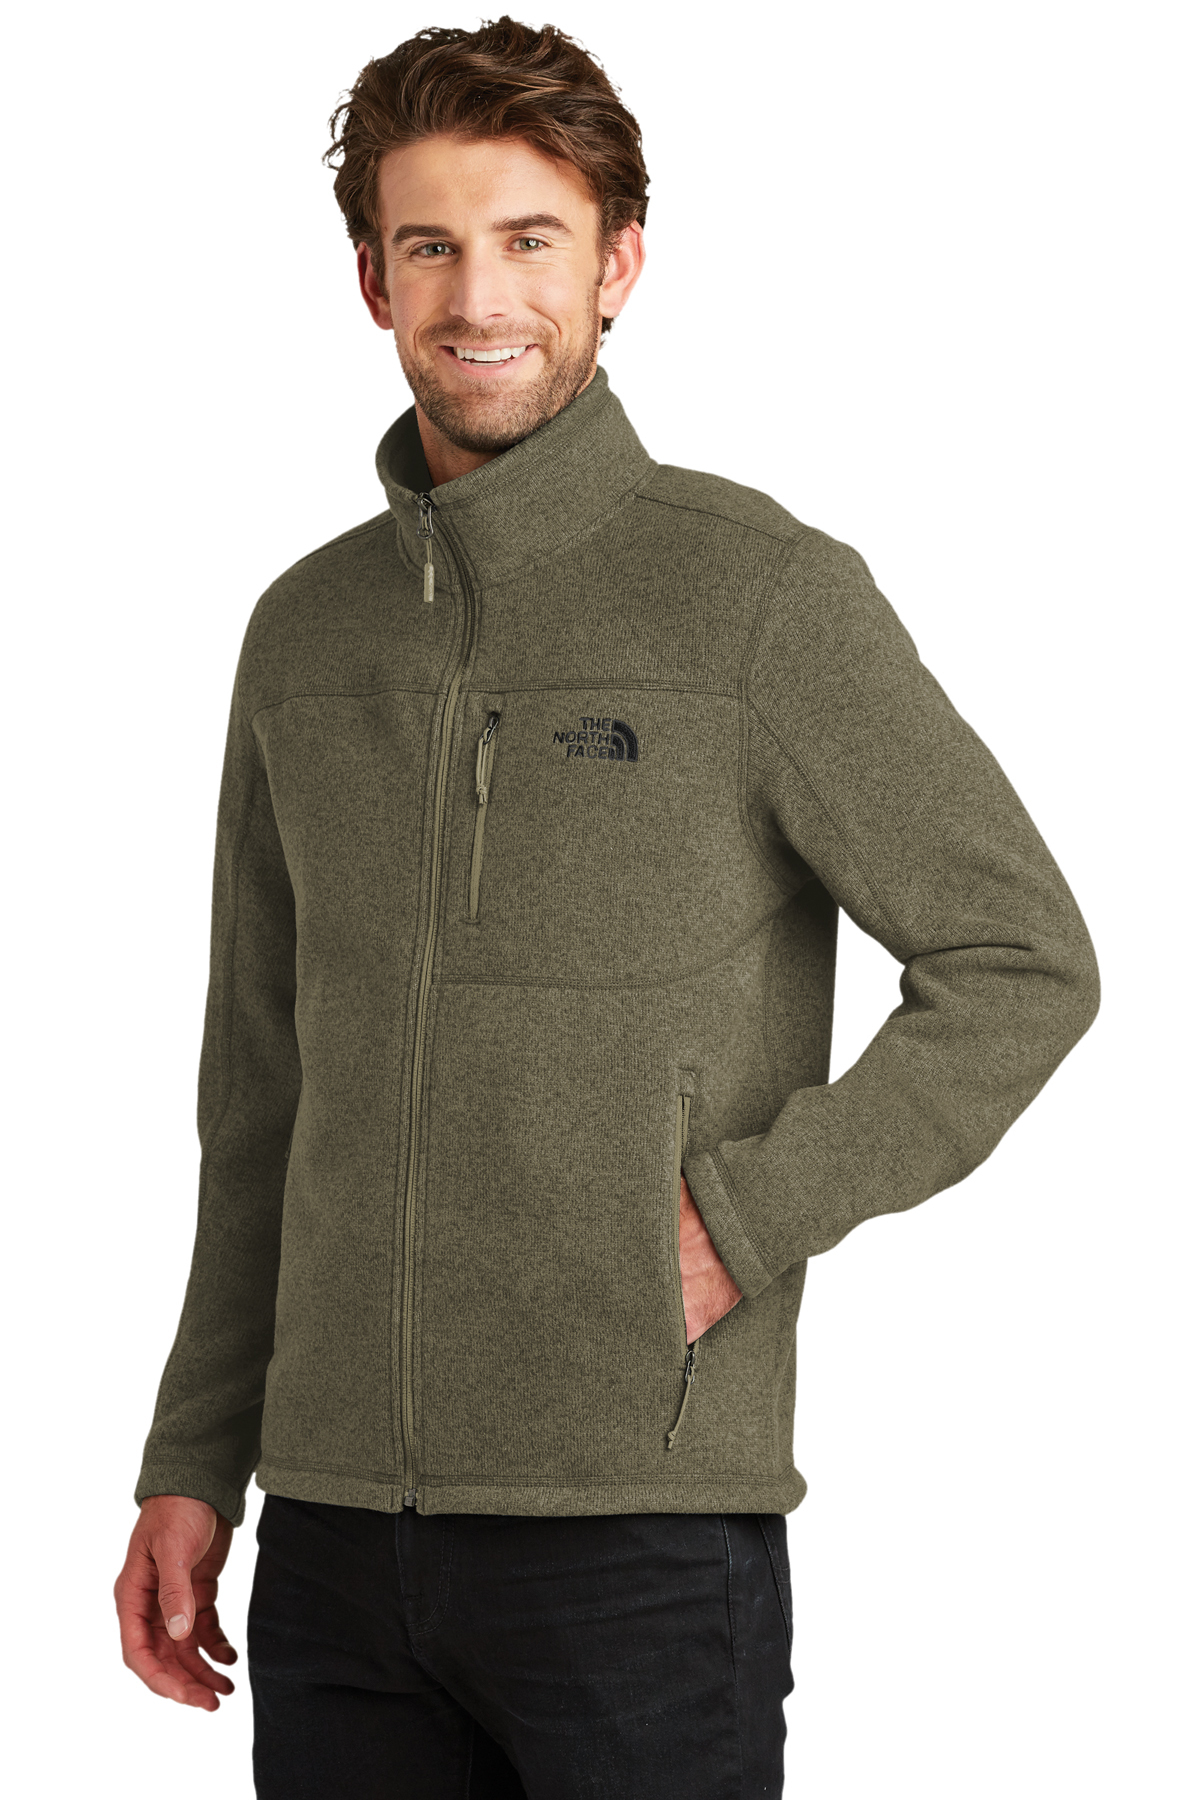 The North Face® Sweater Fleece Jacket | Corporate Jackets | Outerwear